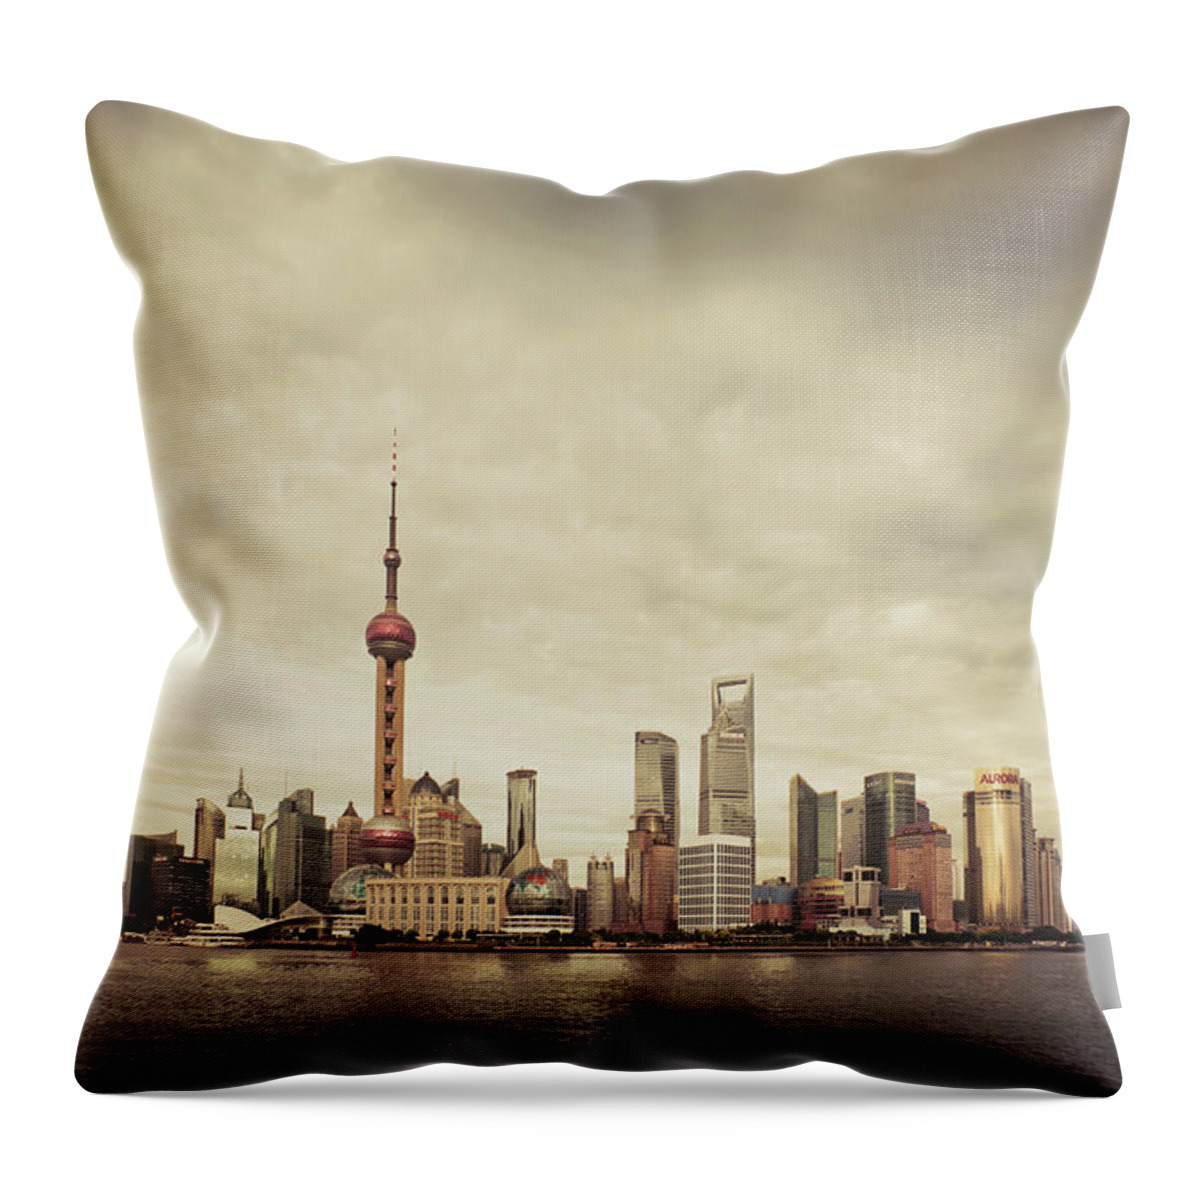 Communications Tower Throw Pillow featuring the photograph City Skyline At Sunset, Shanghai, China by D3sign